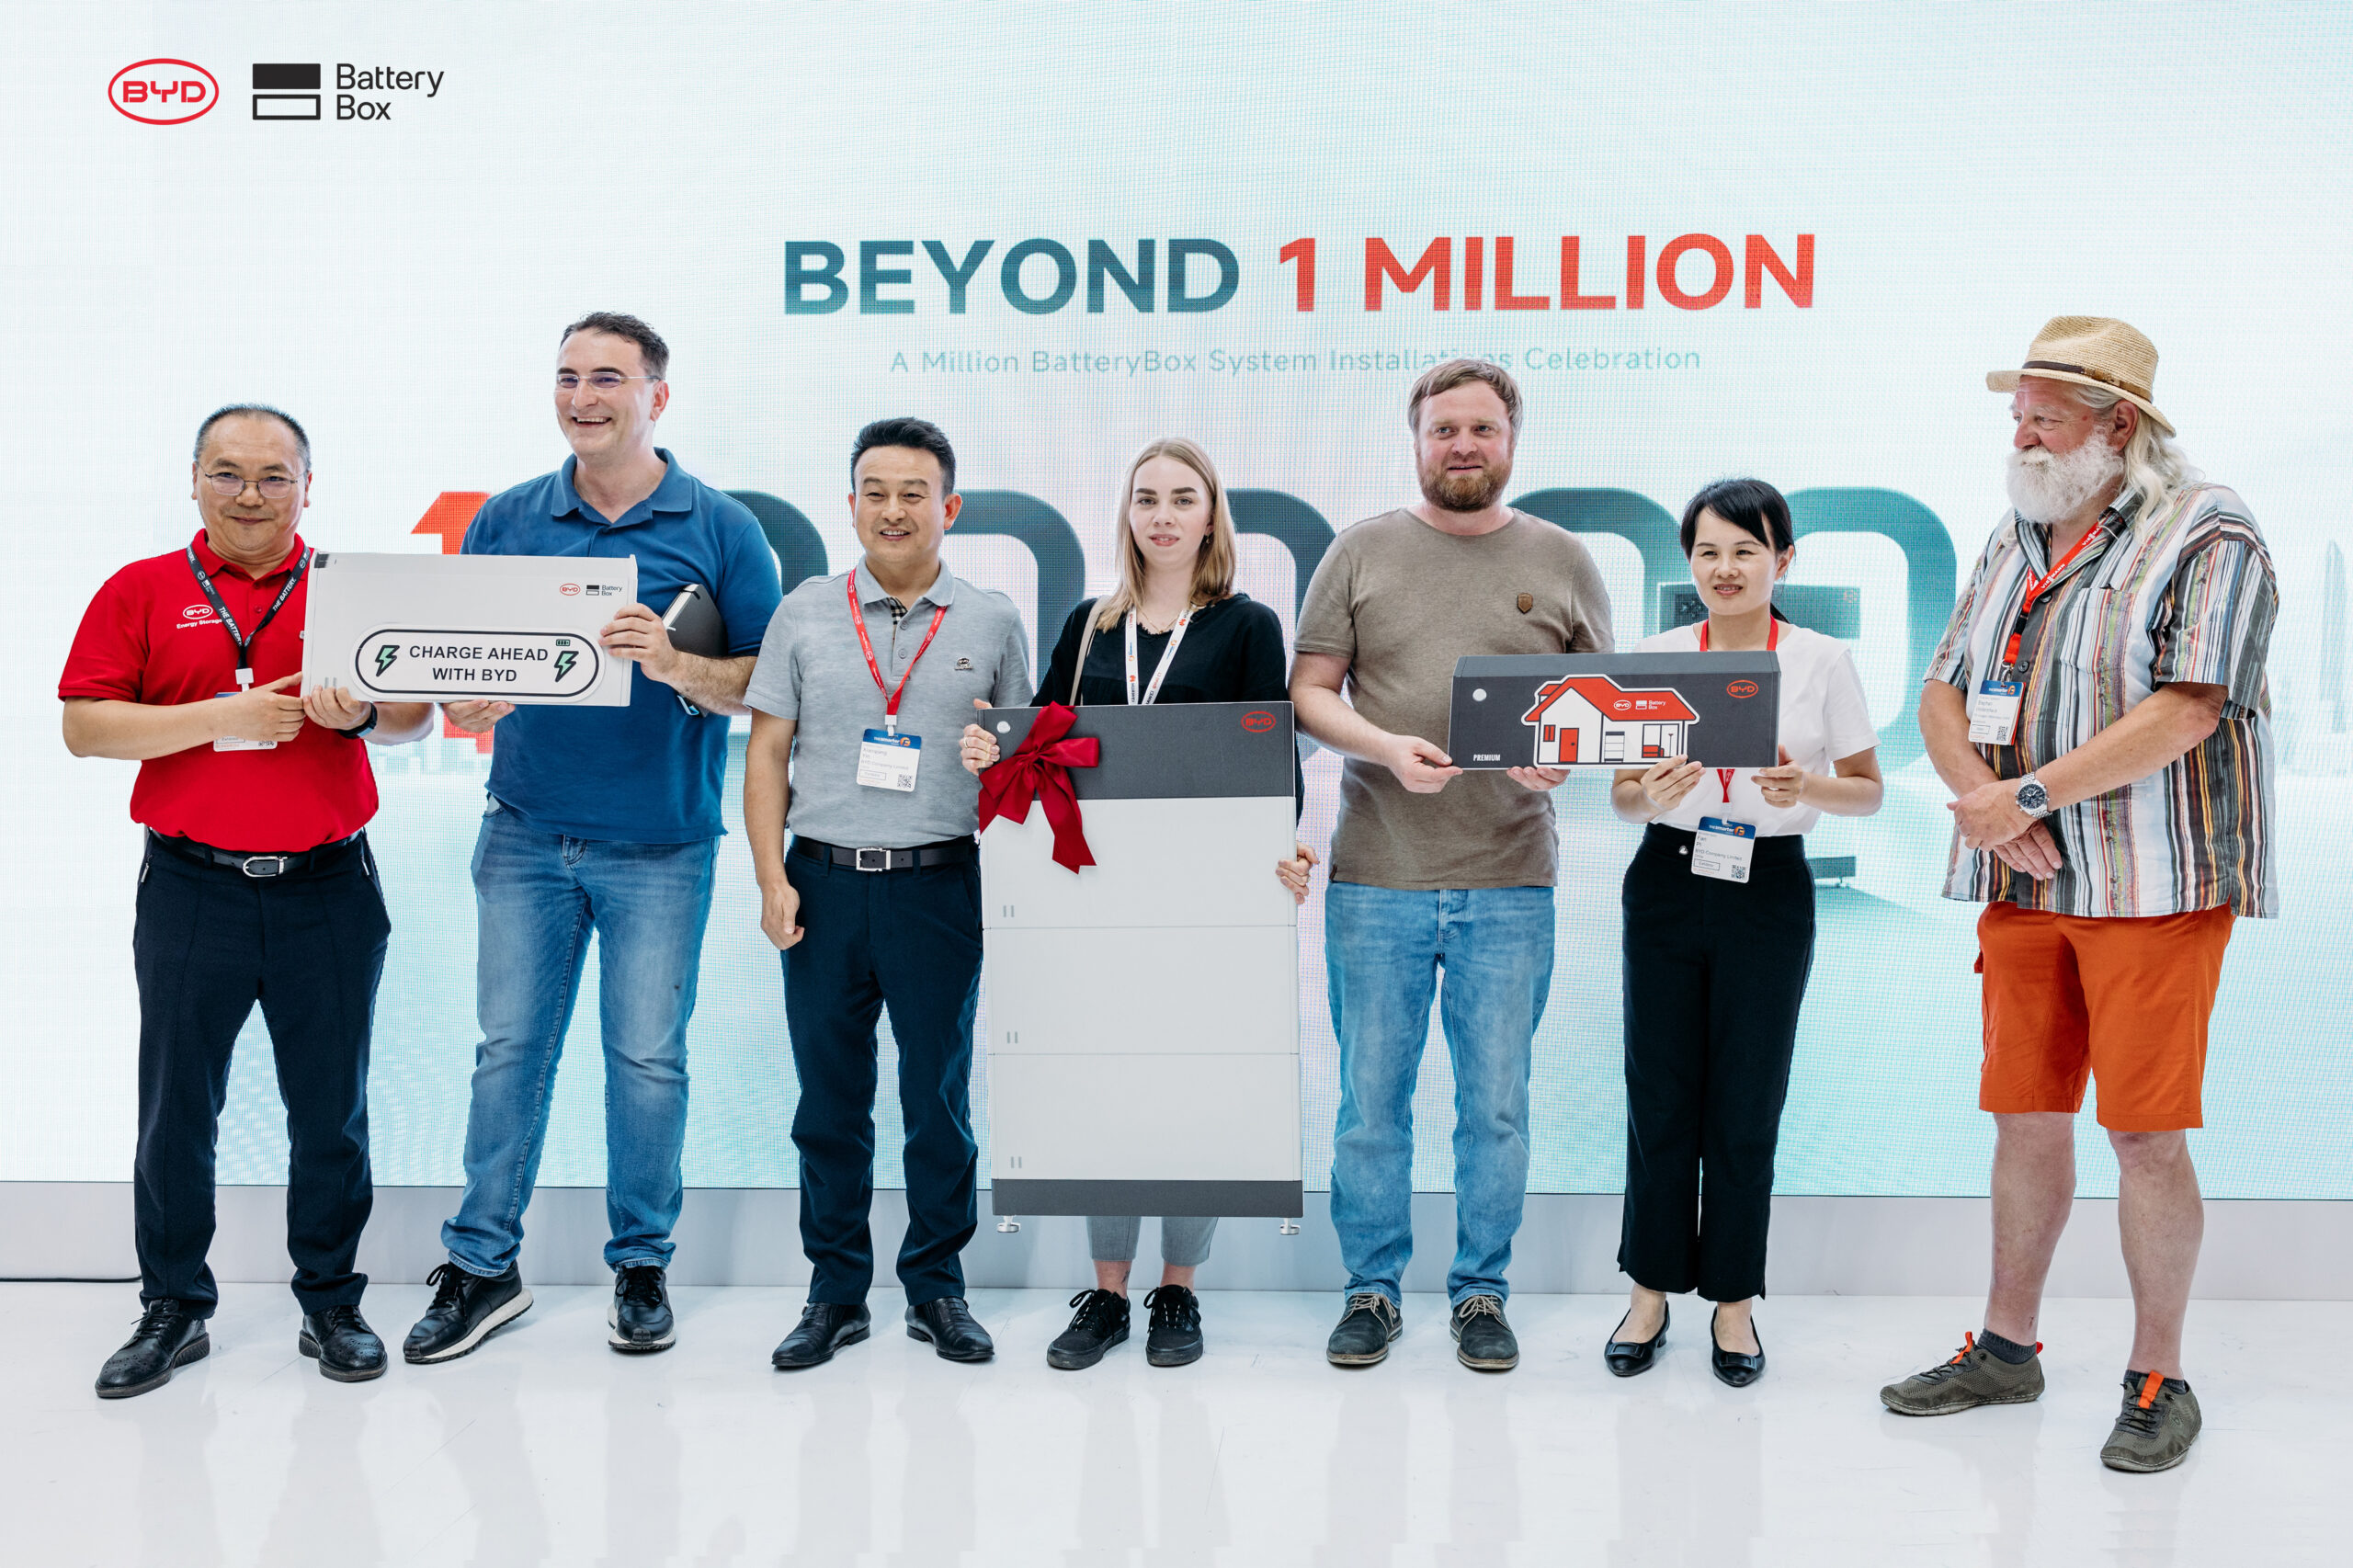 BYD Celebrates The One Millionth Installation of Its Home & Small Commercial BatteryBox Energy Storage Product - CleanTechnica